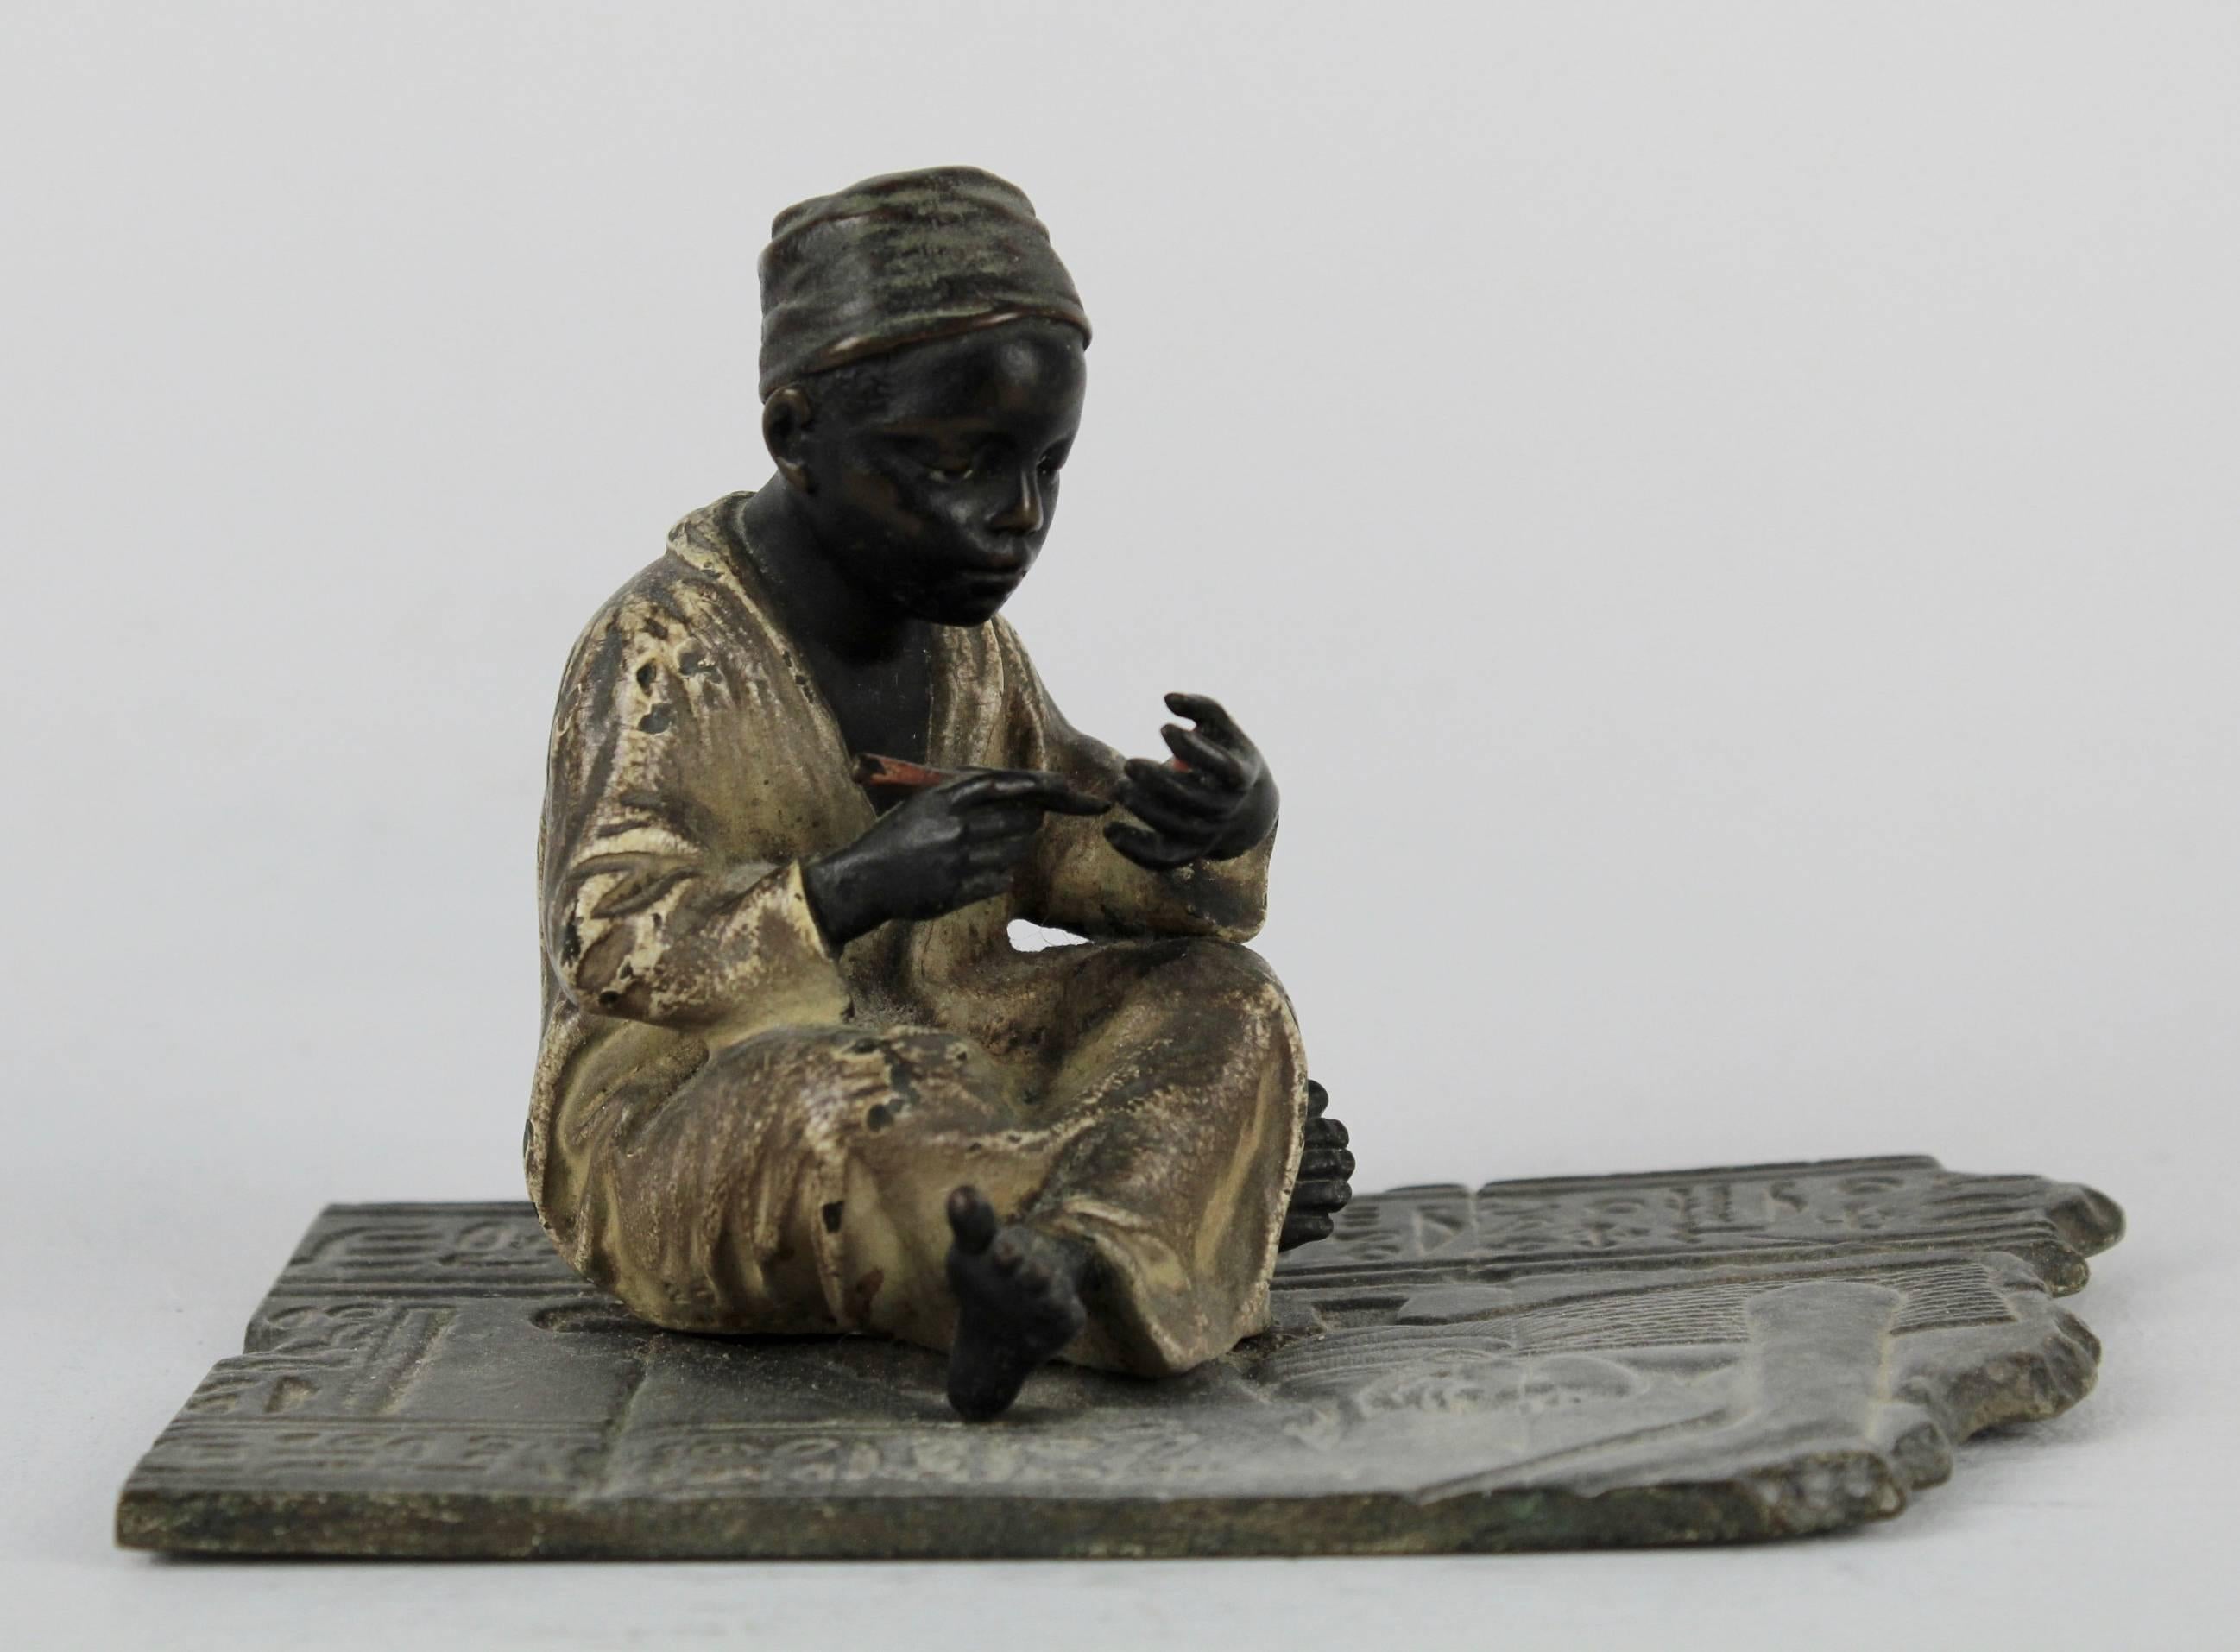 A fine early example of a signed F Bergmann cold painted Orientalist bronze. It depicts a seated Arab or North African youth with pen in hand. He sits with legs crossed on a floor that has low relief hieroglyphics and is a student or scribe. The boy